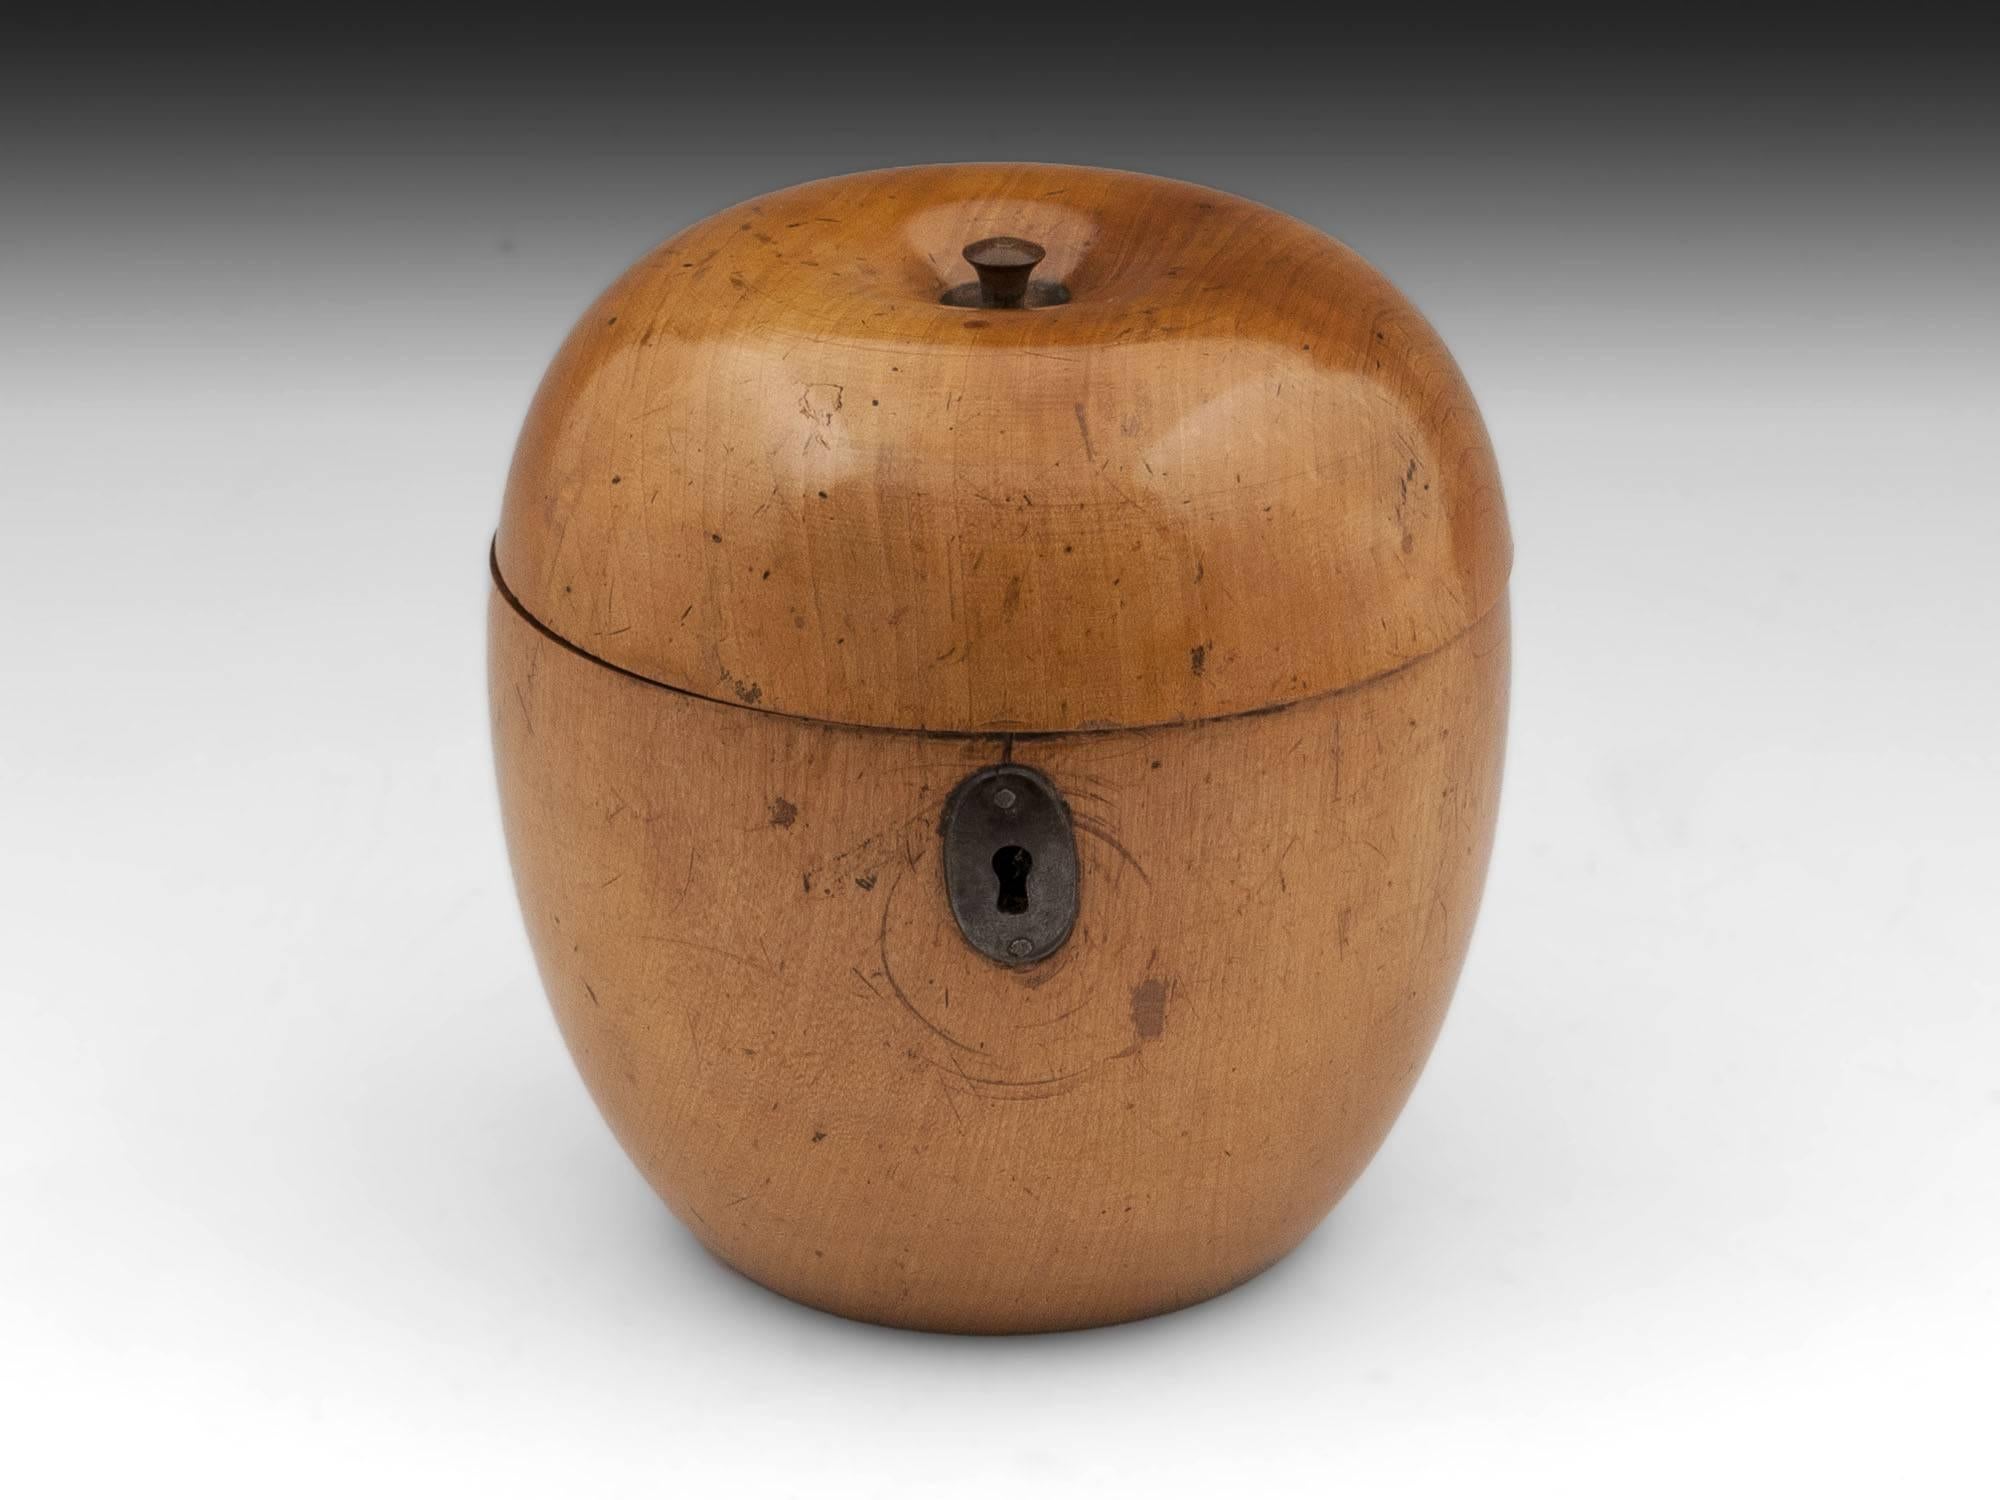 Antique apple tea caddy with great blonde color and patination, has button stalk and oval cut steel escutcheon.
This fabulous treen apple caddy interior still has traces of its original tin foil lining, comes with a fully working lock and tasselled